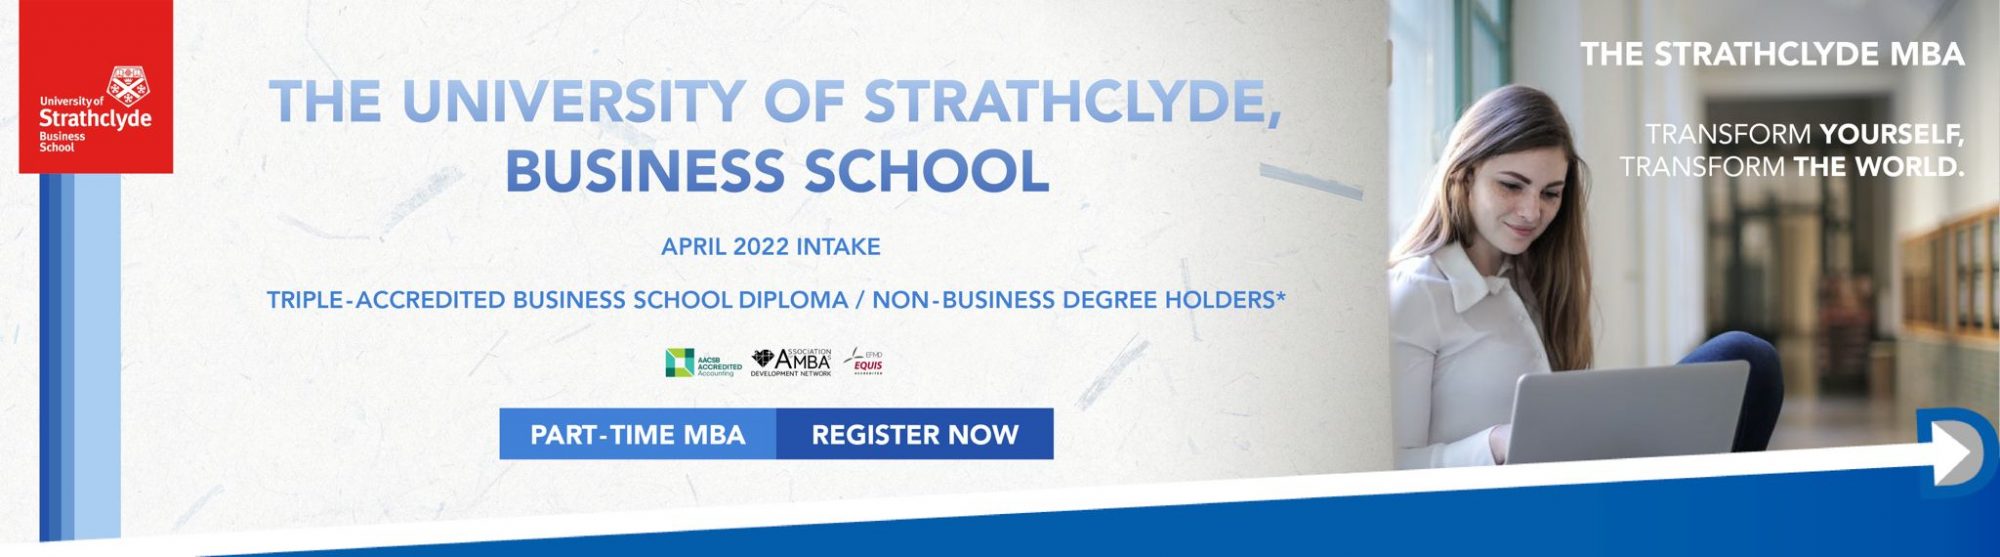 THE STRATHCLYDE MBA